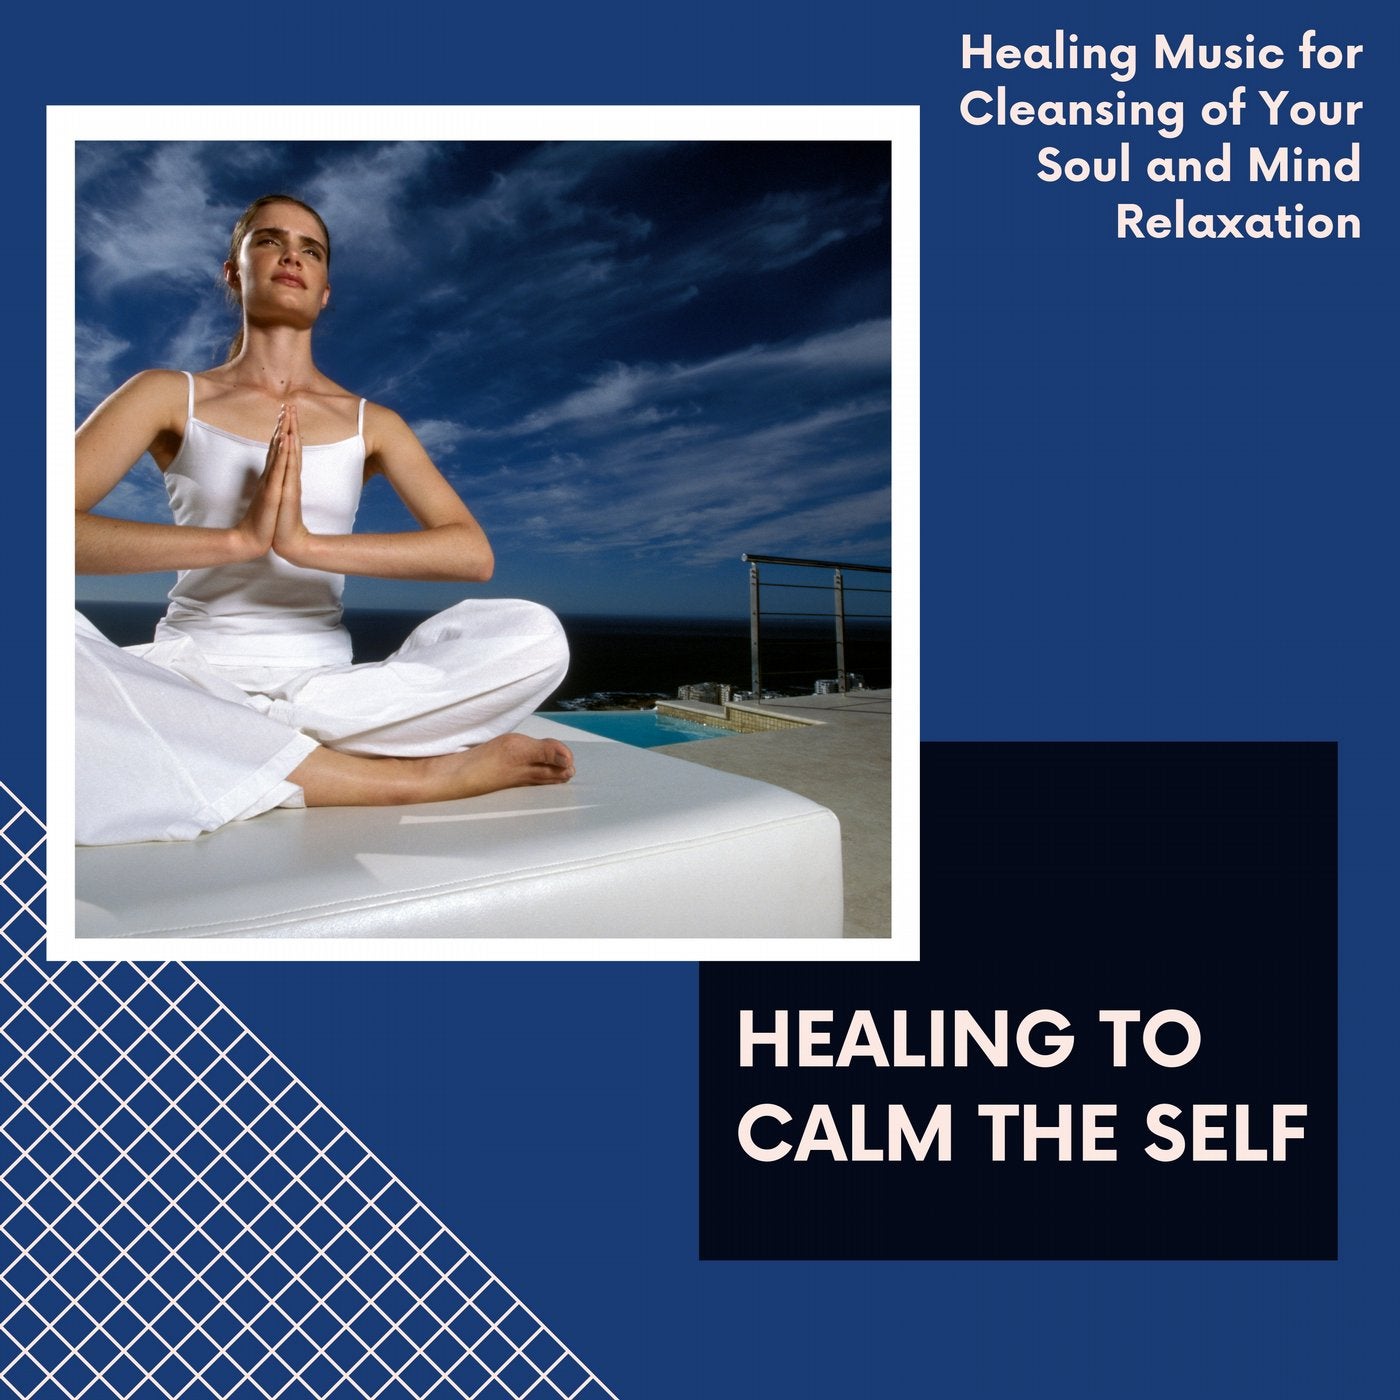 Healing To Calm The Self - Healing Music For Cleansing Of Your Soul And Mind Relaxation